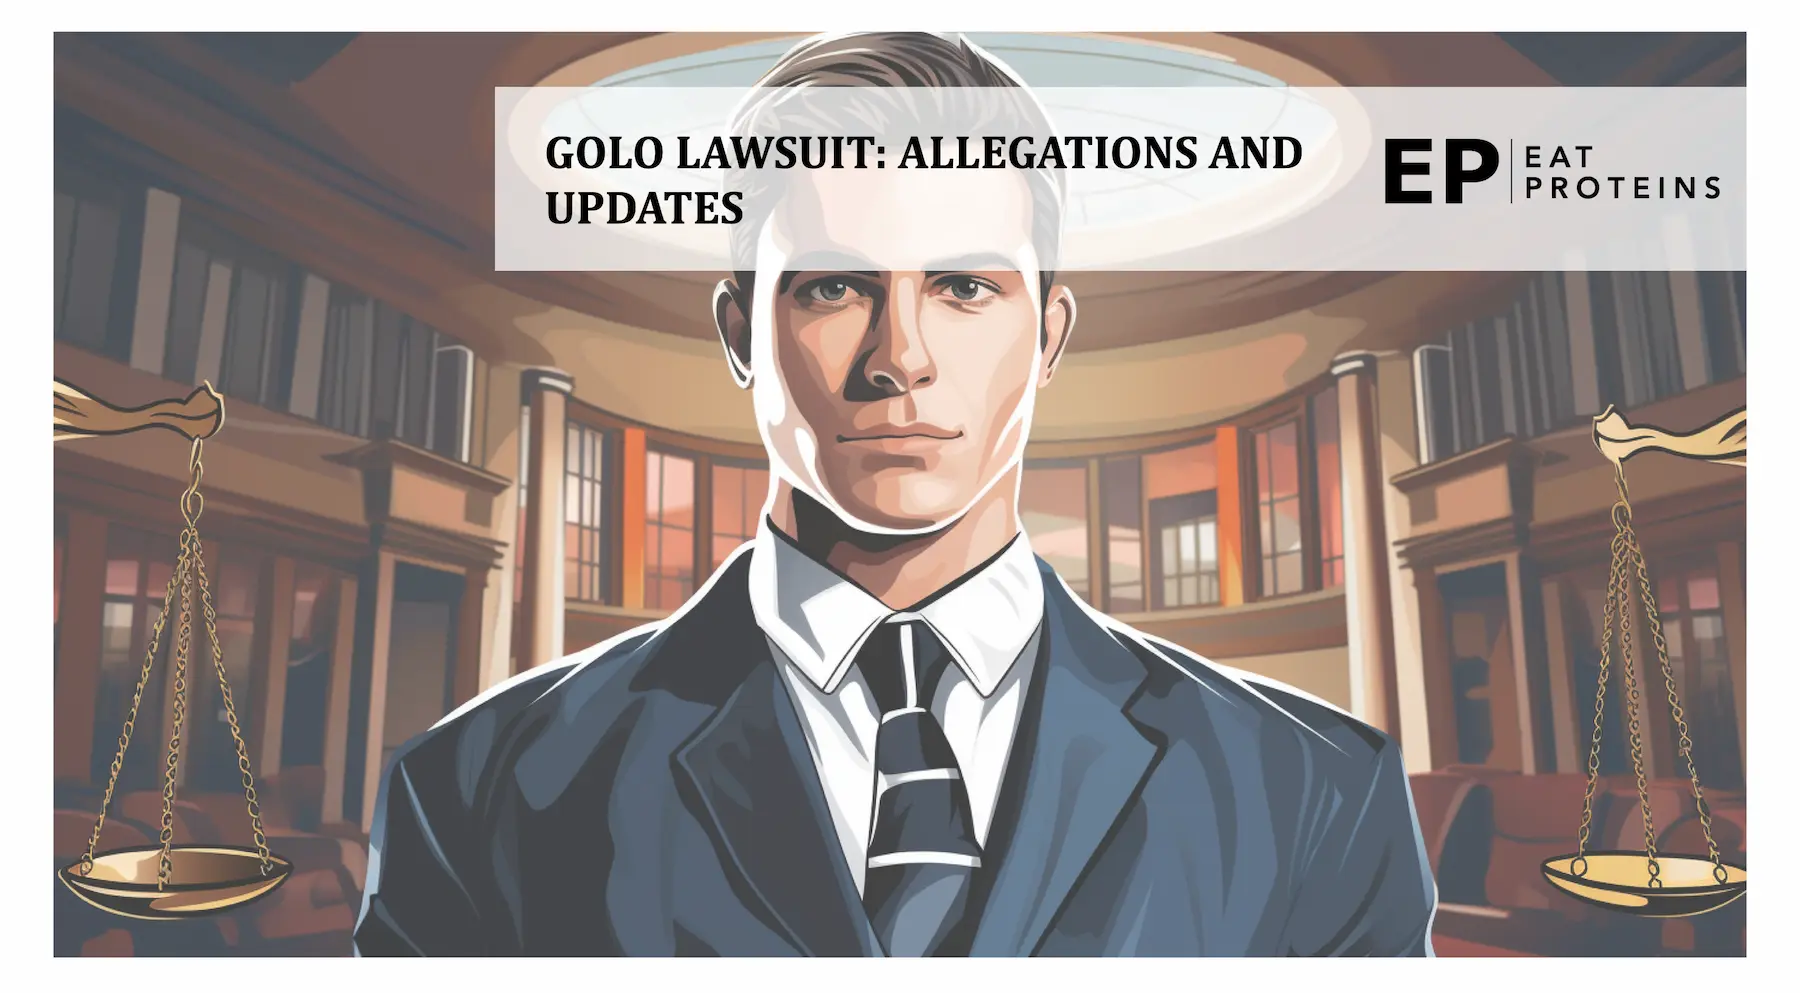 GOLO action class lawsuit and updates